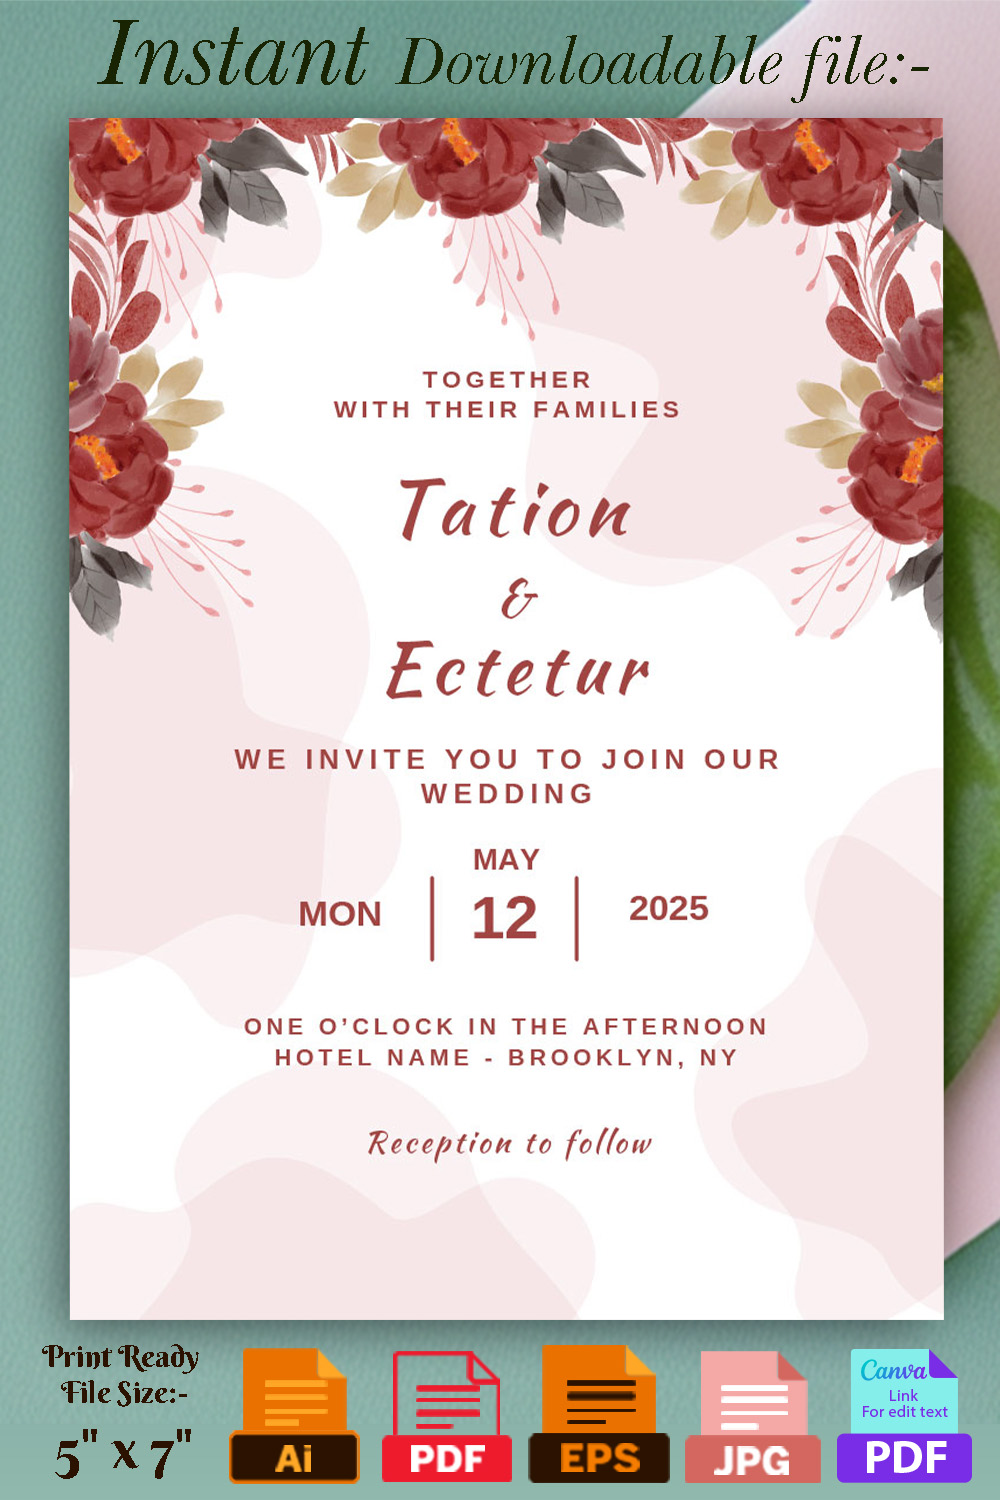 Image of irresistible wedding invitation with floral design.